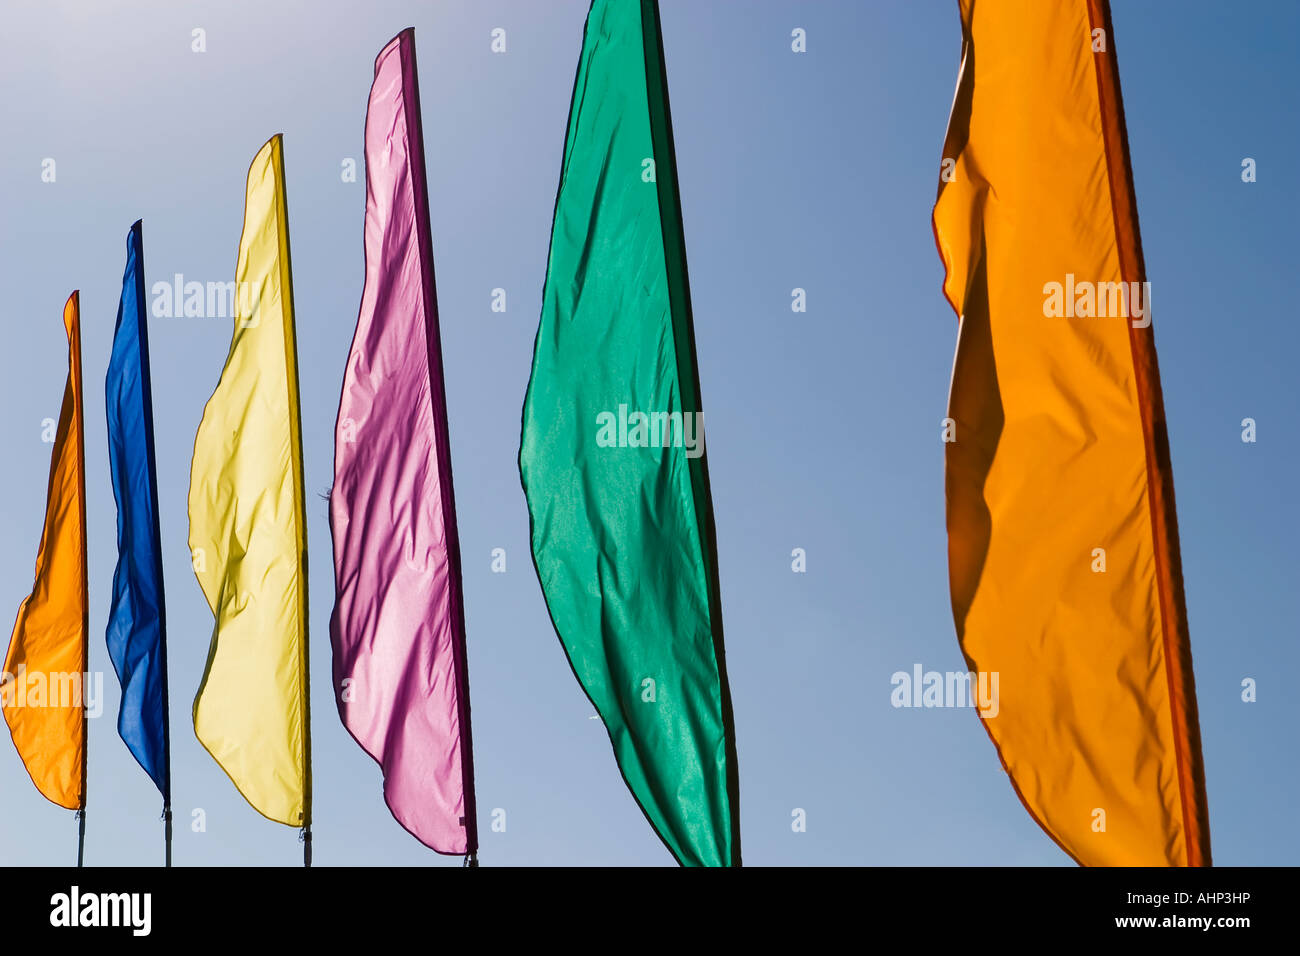 Brightly colored banners waving in the wind. Stock Photo